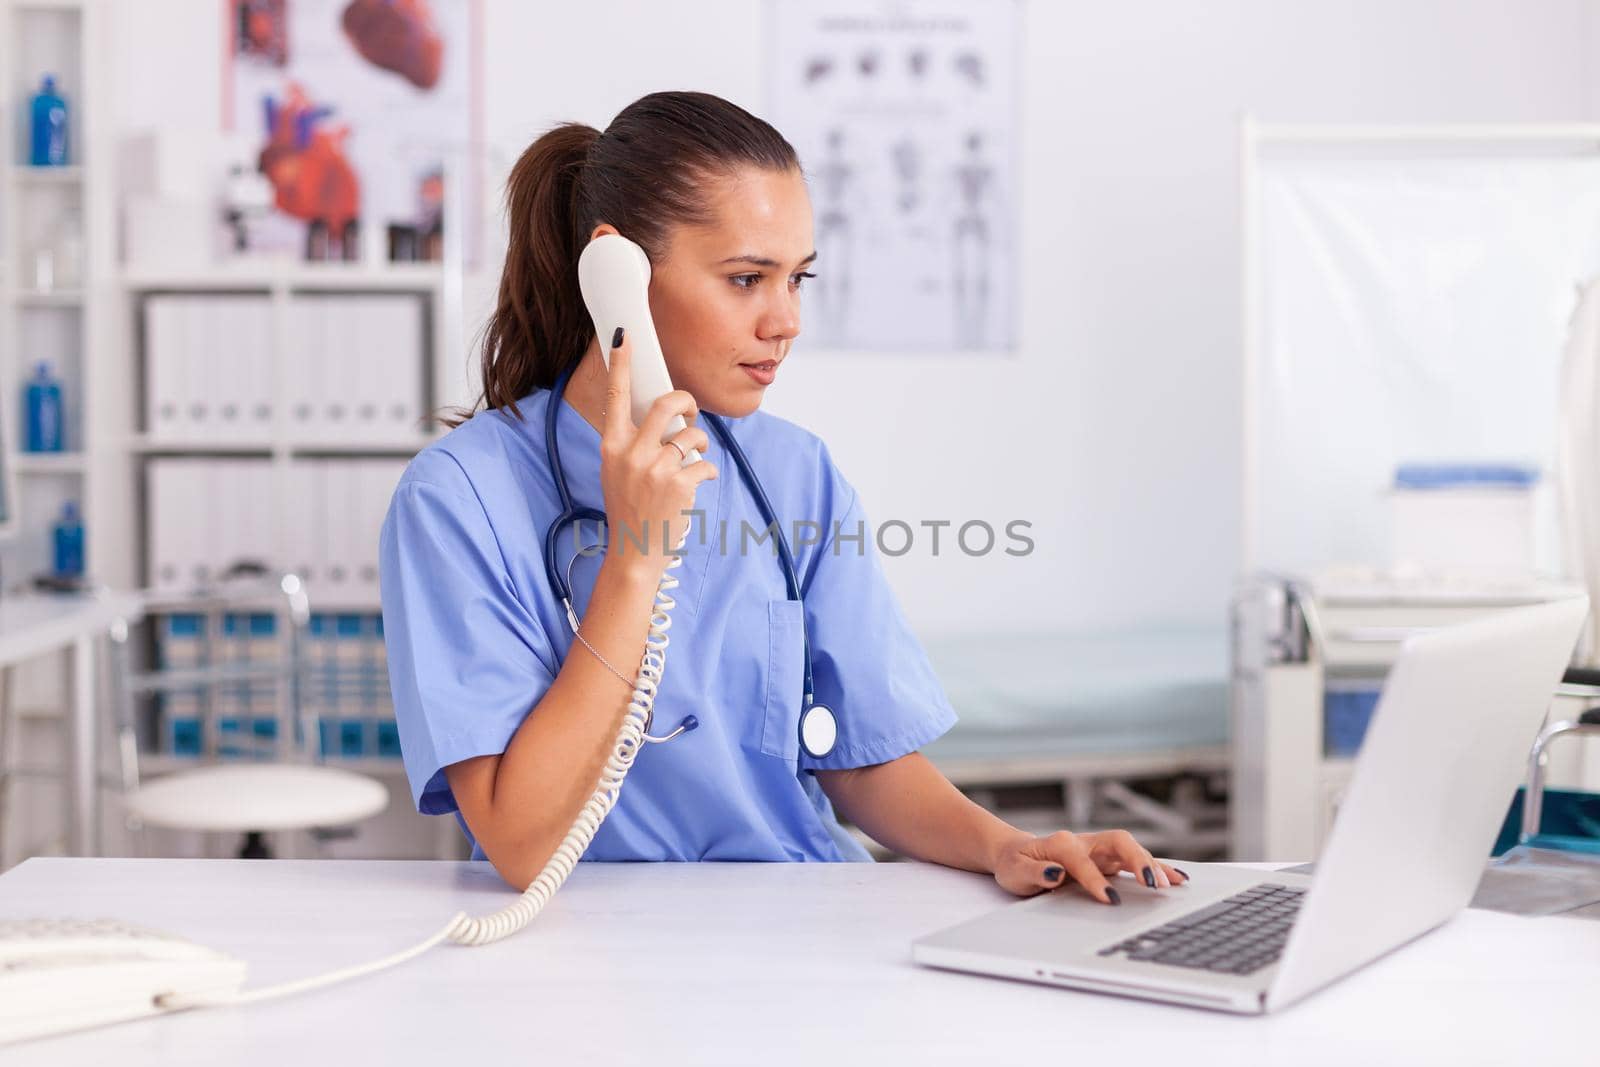 Medical practitioner answering phone calls by DCStudio